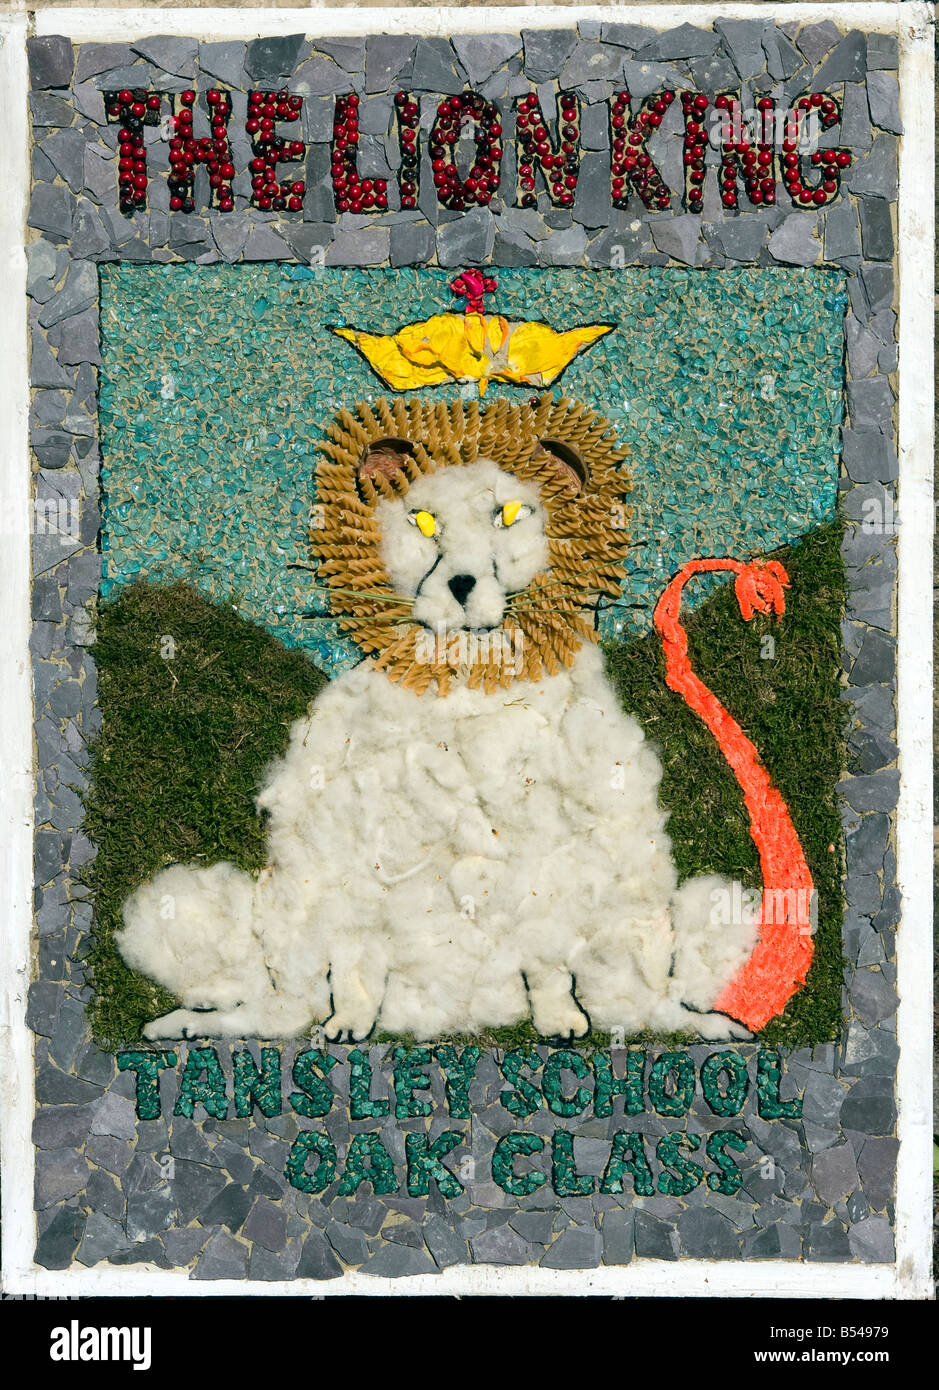 the lion king tansley school oak class village traditional well dressing Stock Photo